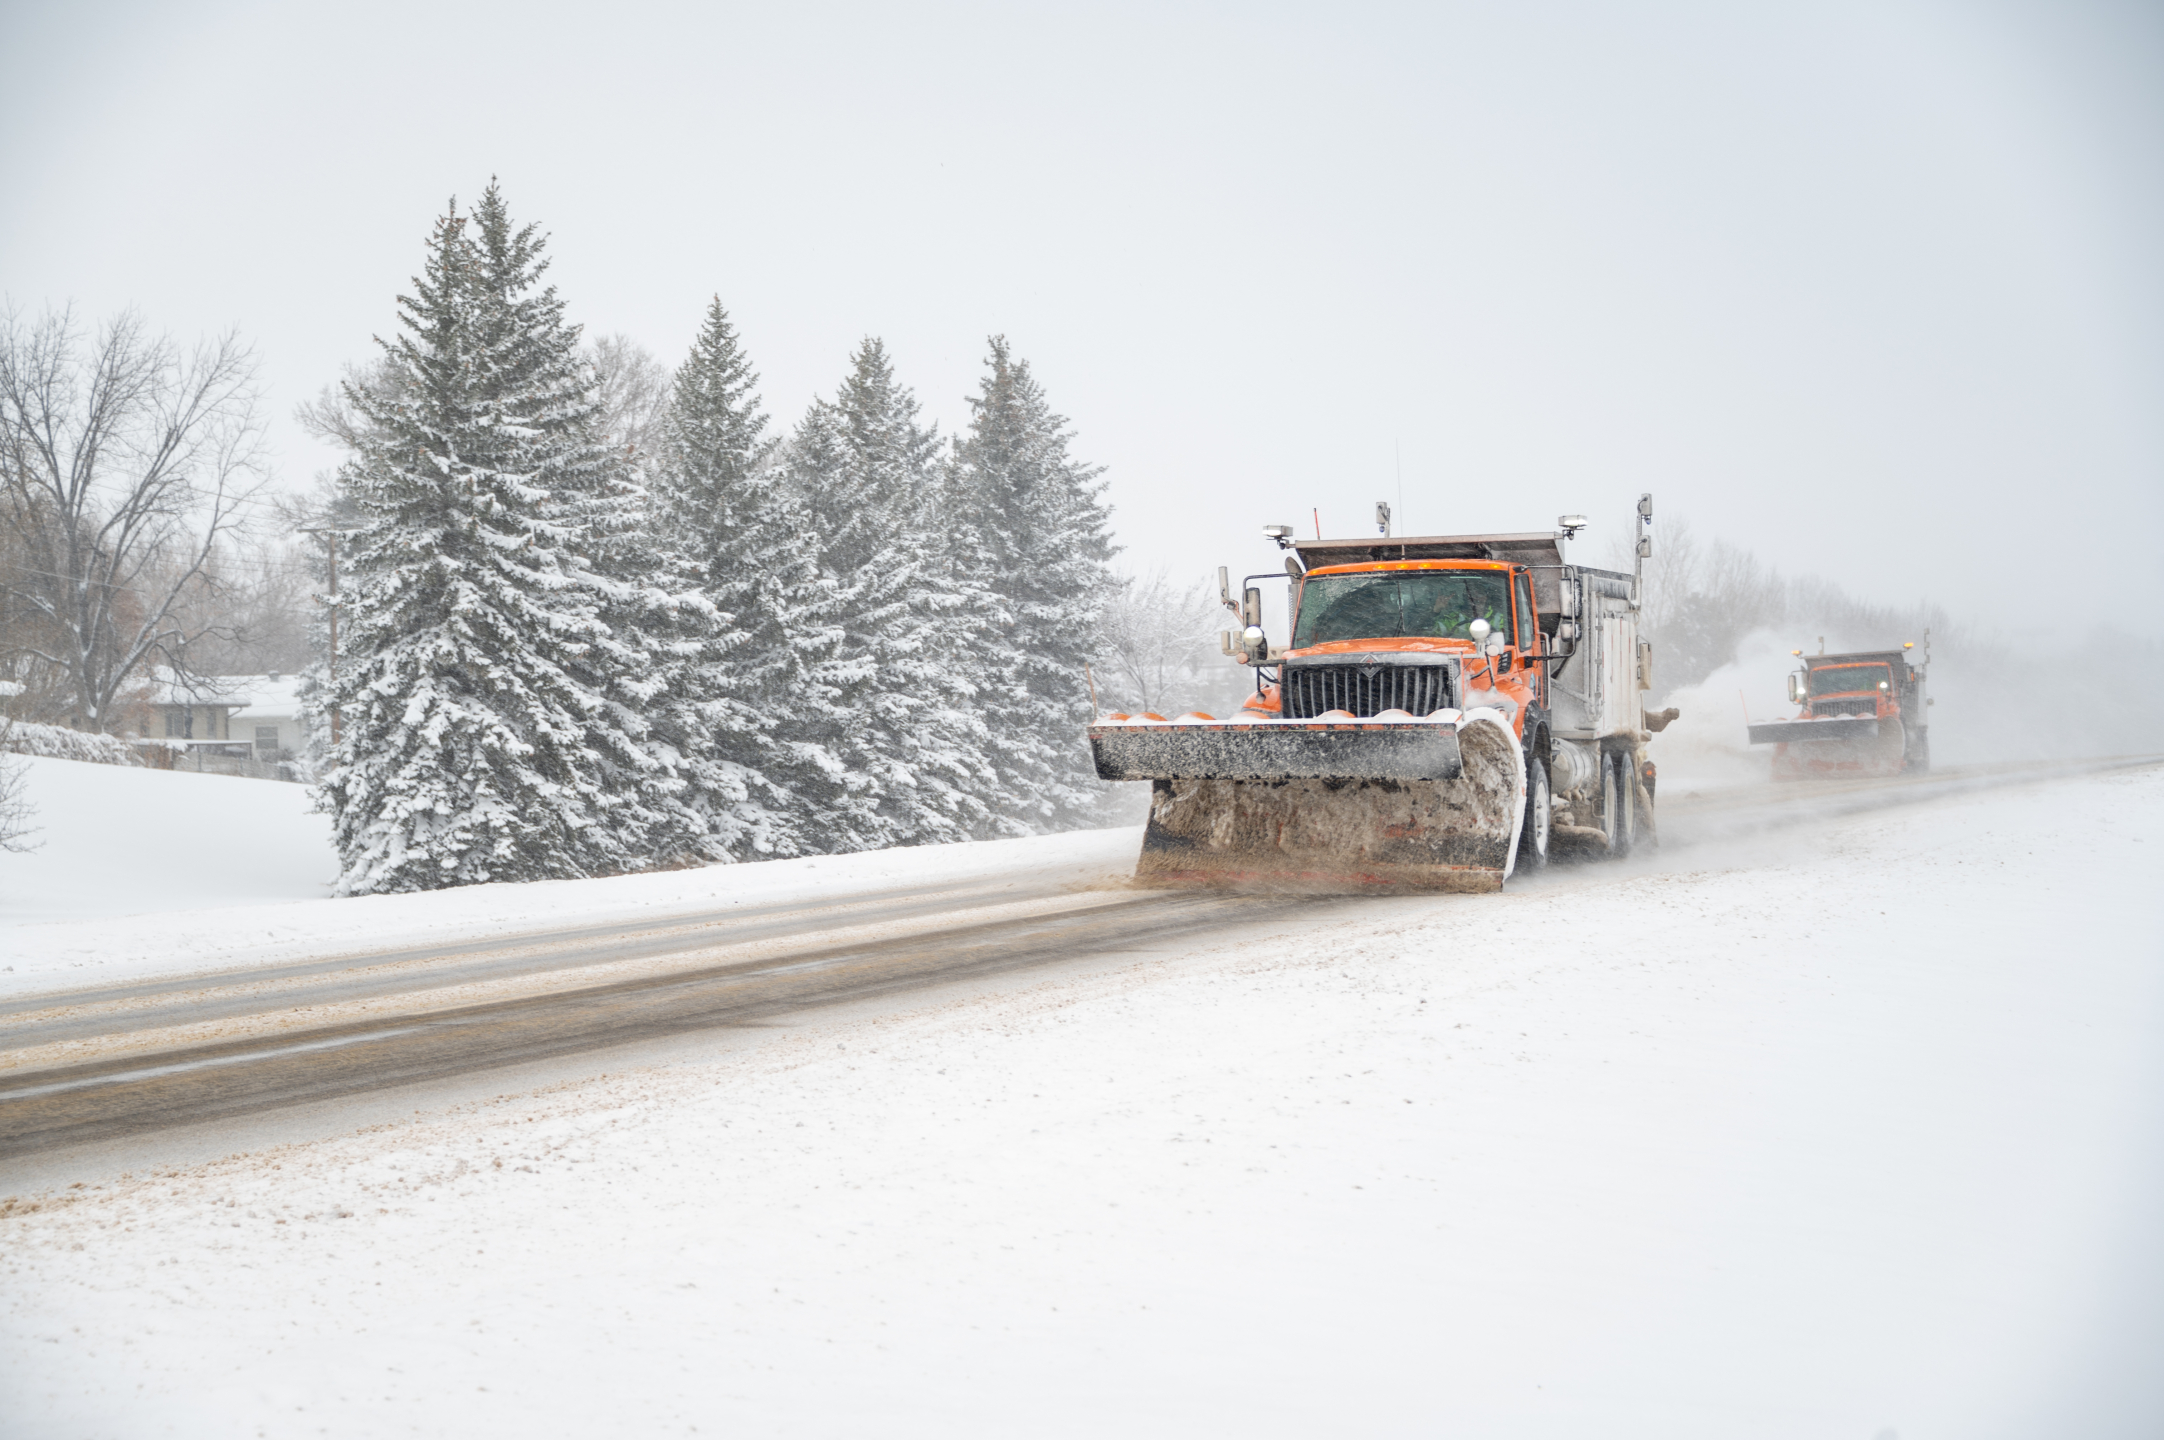 A snowplow clears the highway as another snowplow follows in the distance.